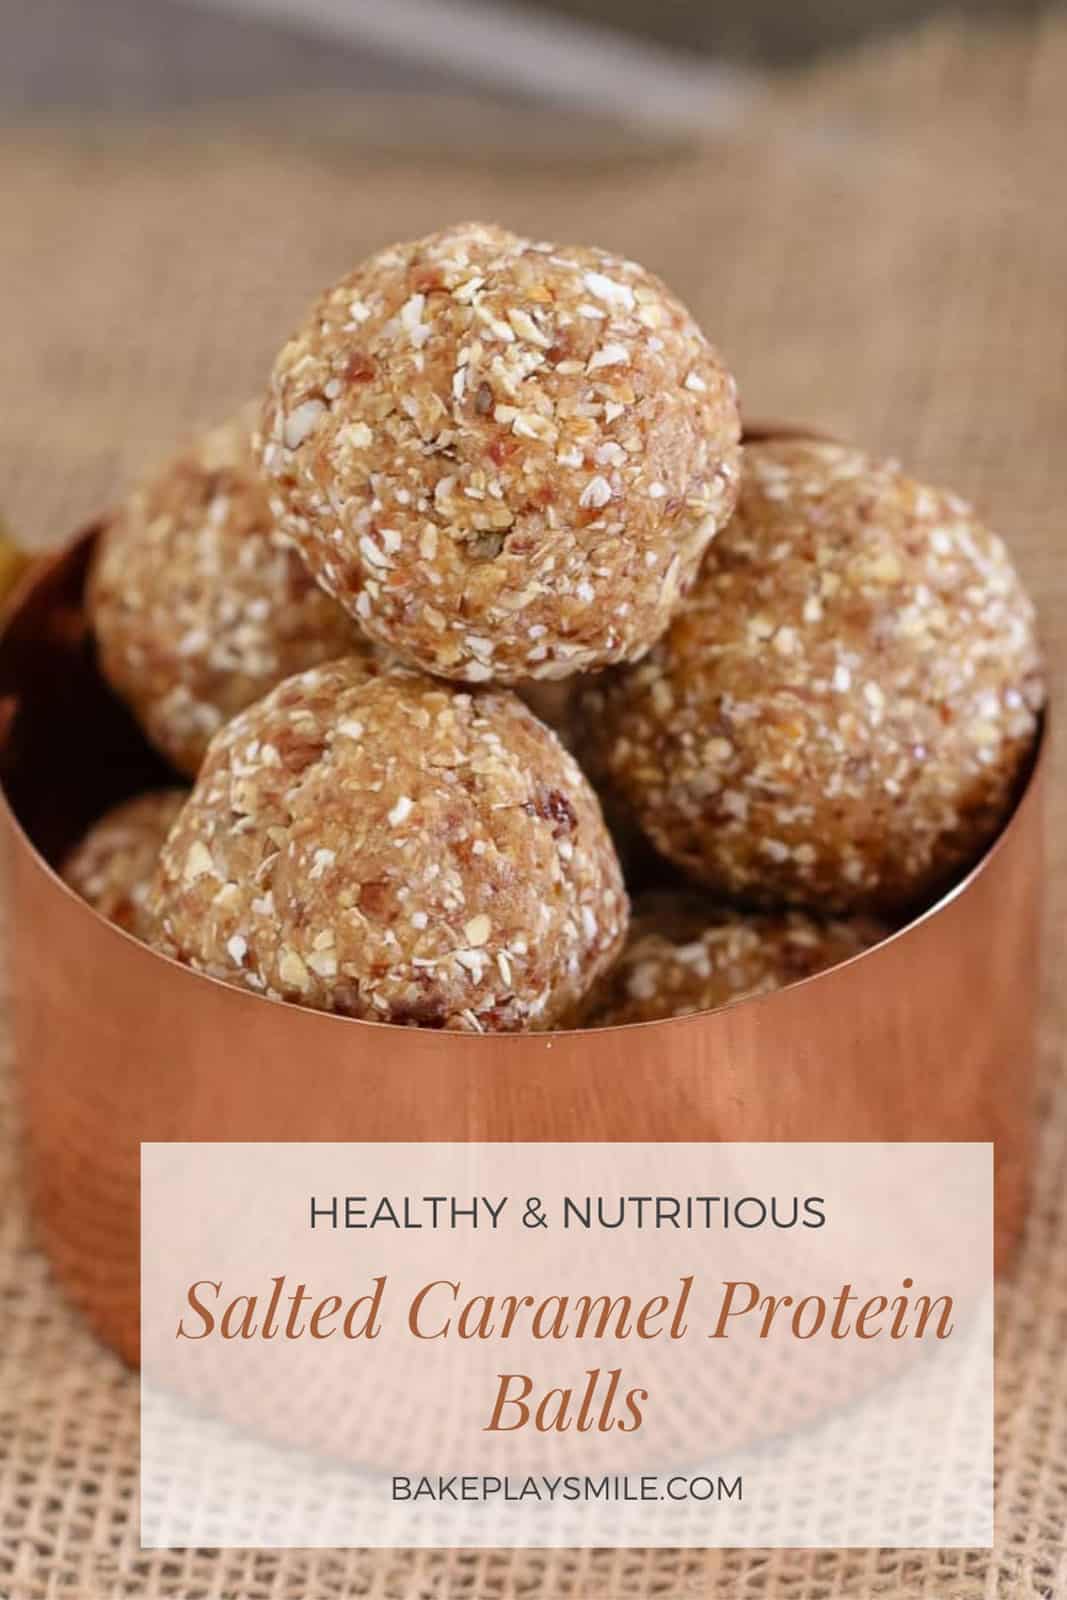 A copper bowl filled with salted caramel protein balls.